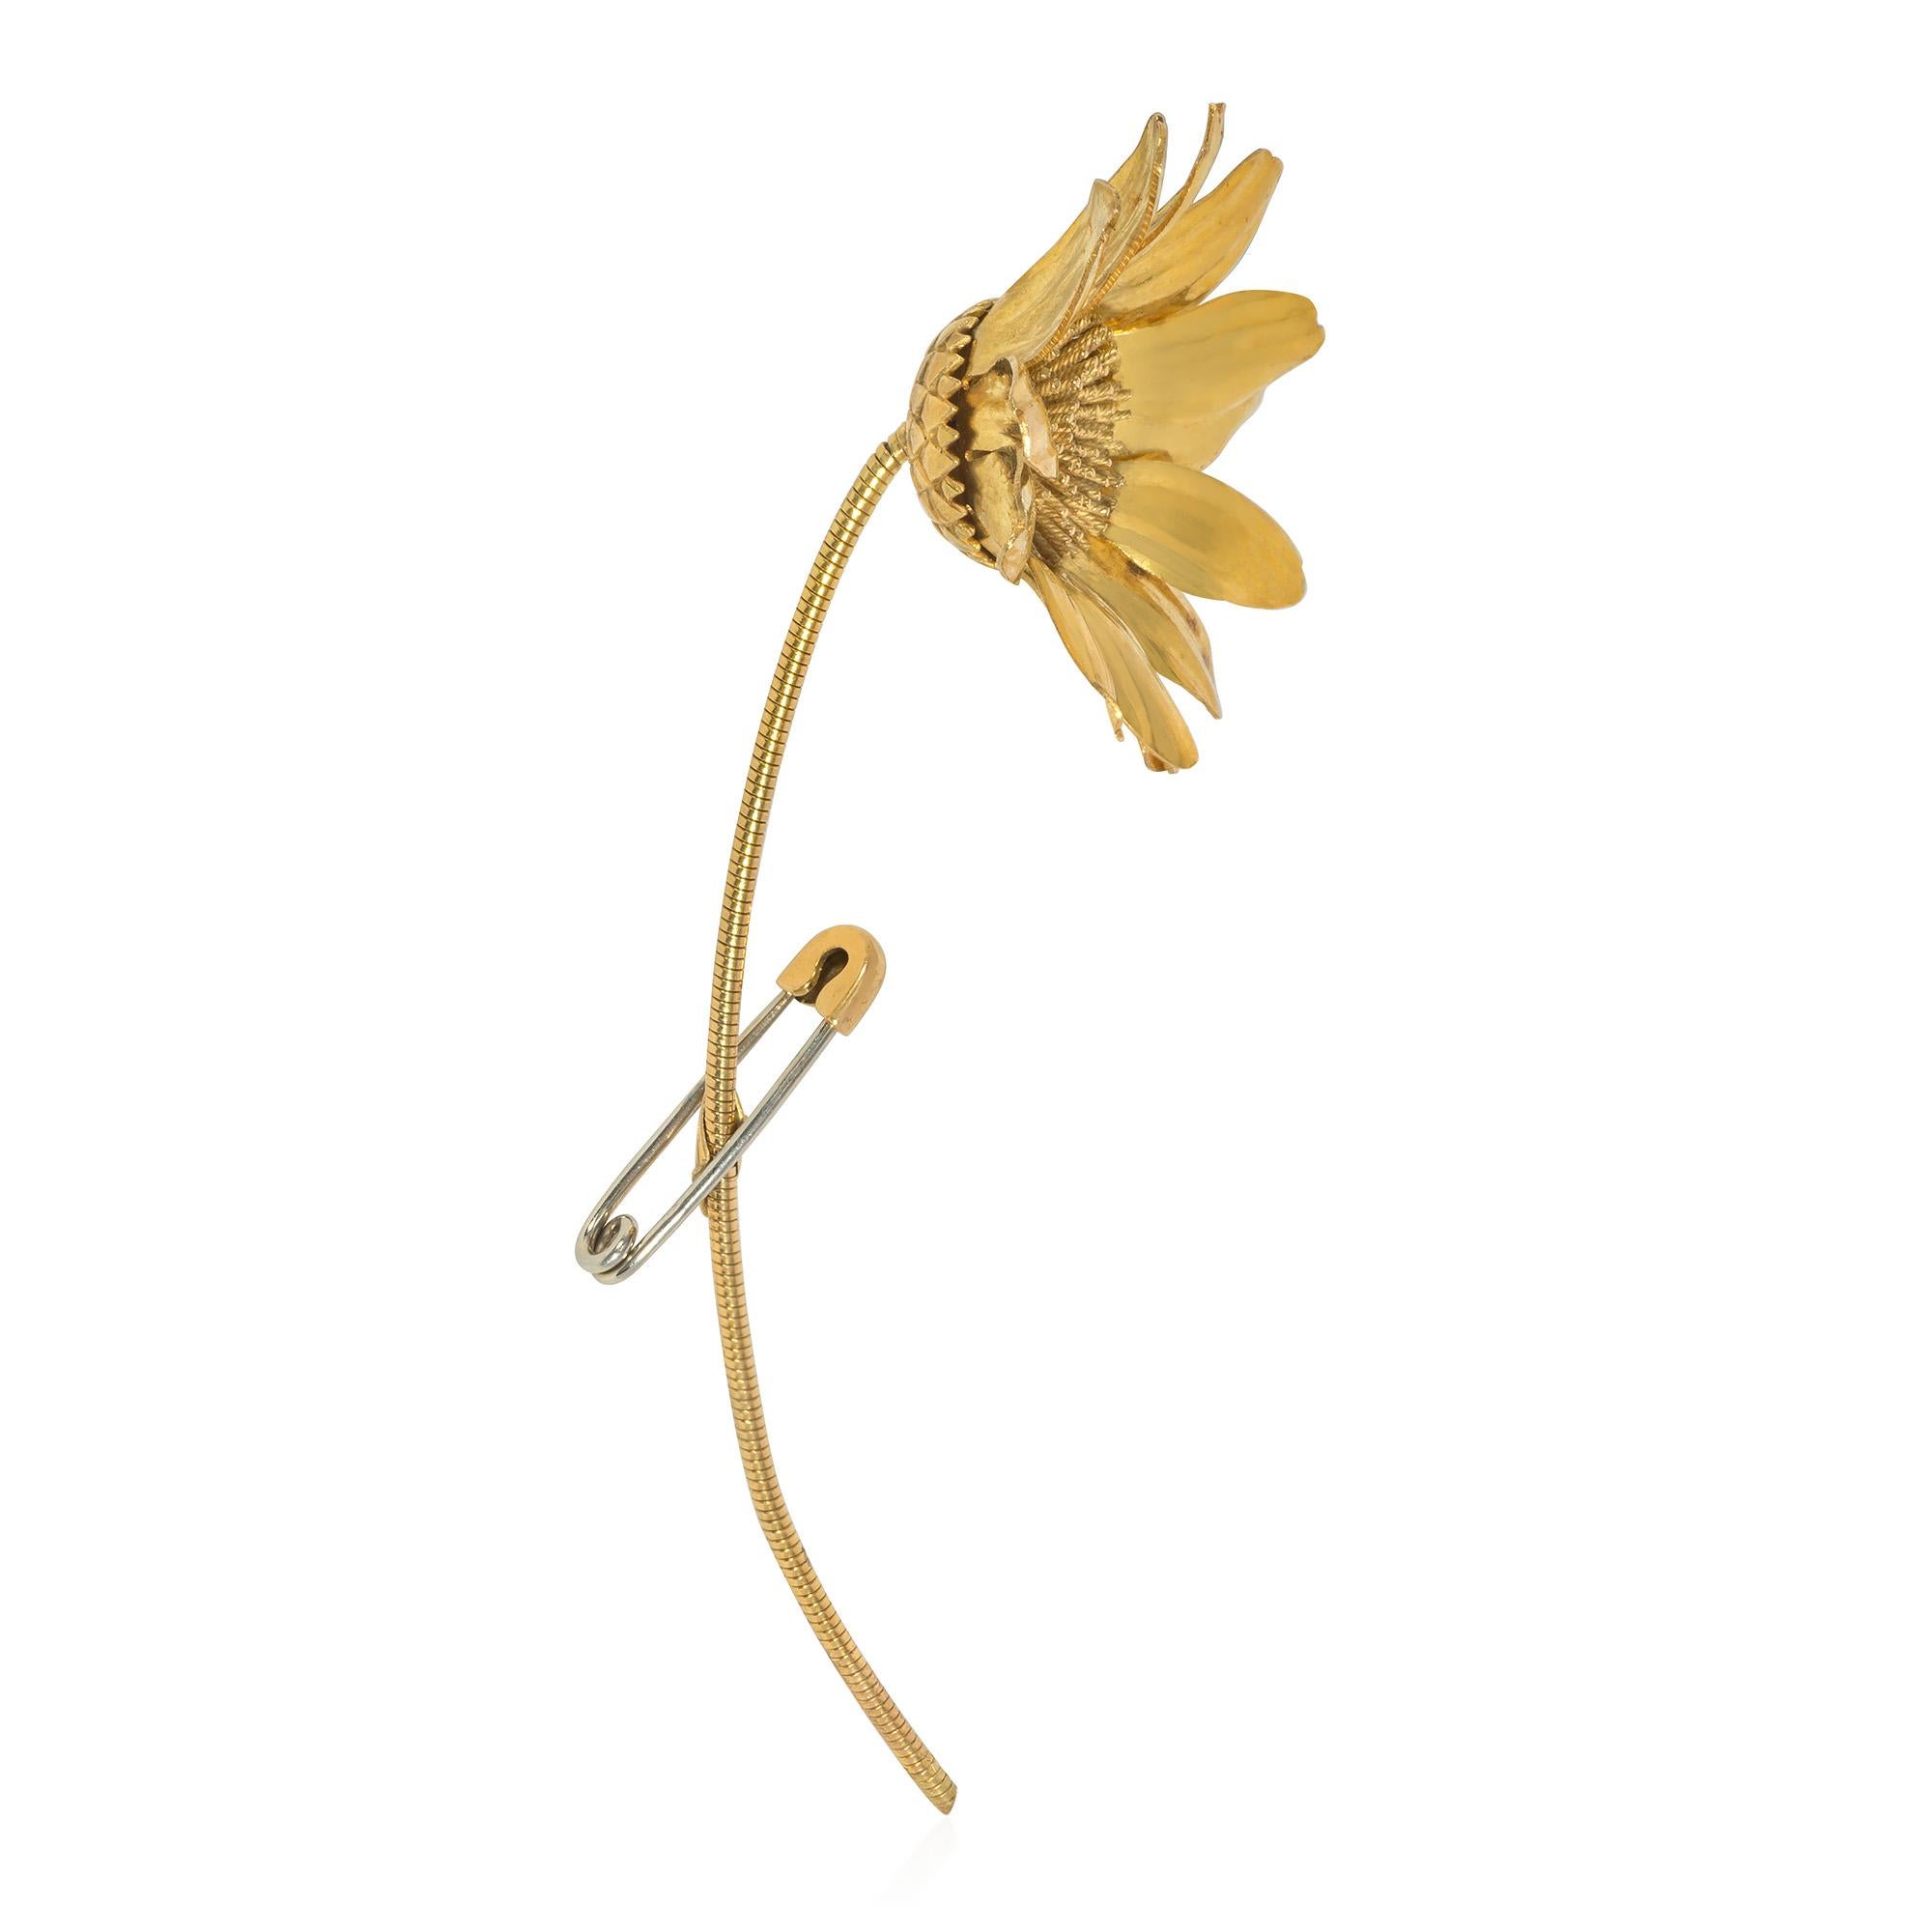 A mid-century gold statement brooch designed as a safety pinned daisy with a central disk of rope twist gold wires, engraved sepal, and a gas pipe-like stem, in 18k. Hermès, Paris. #39604.